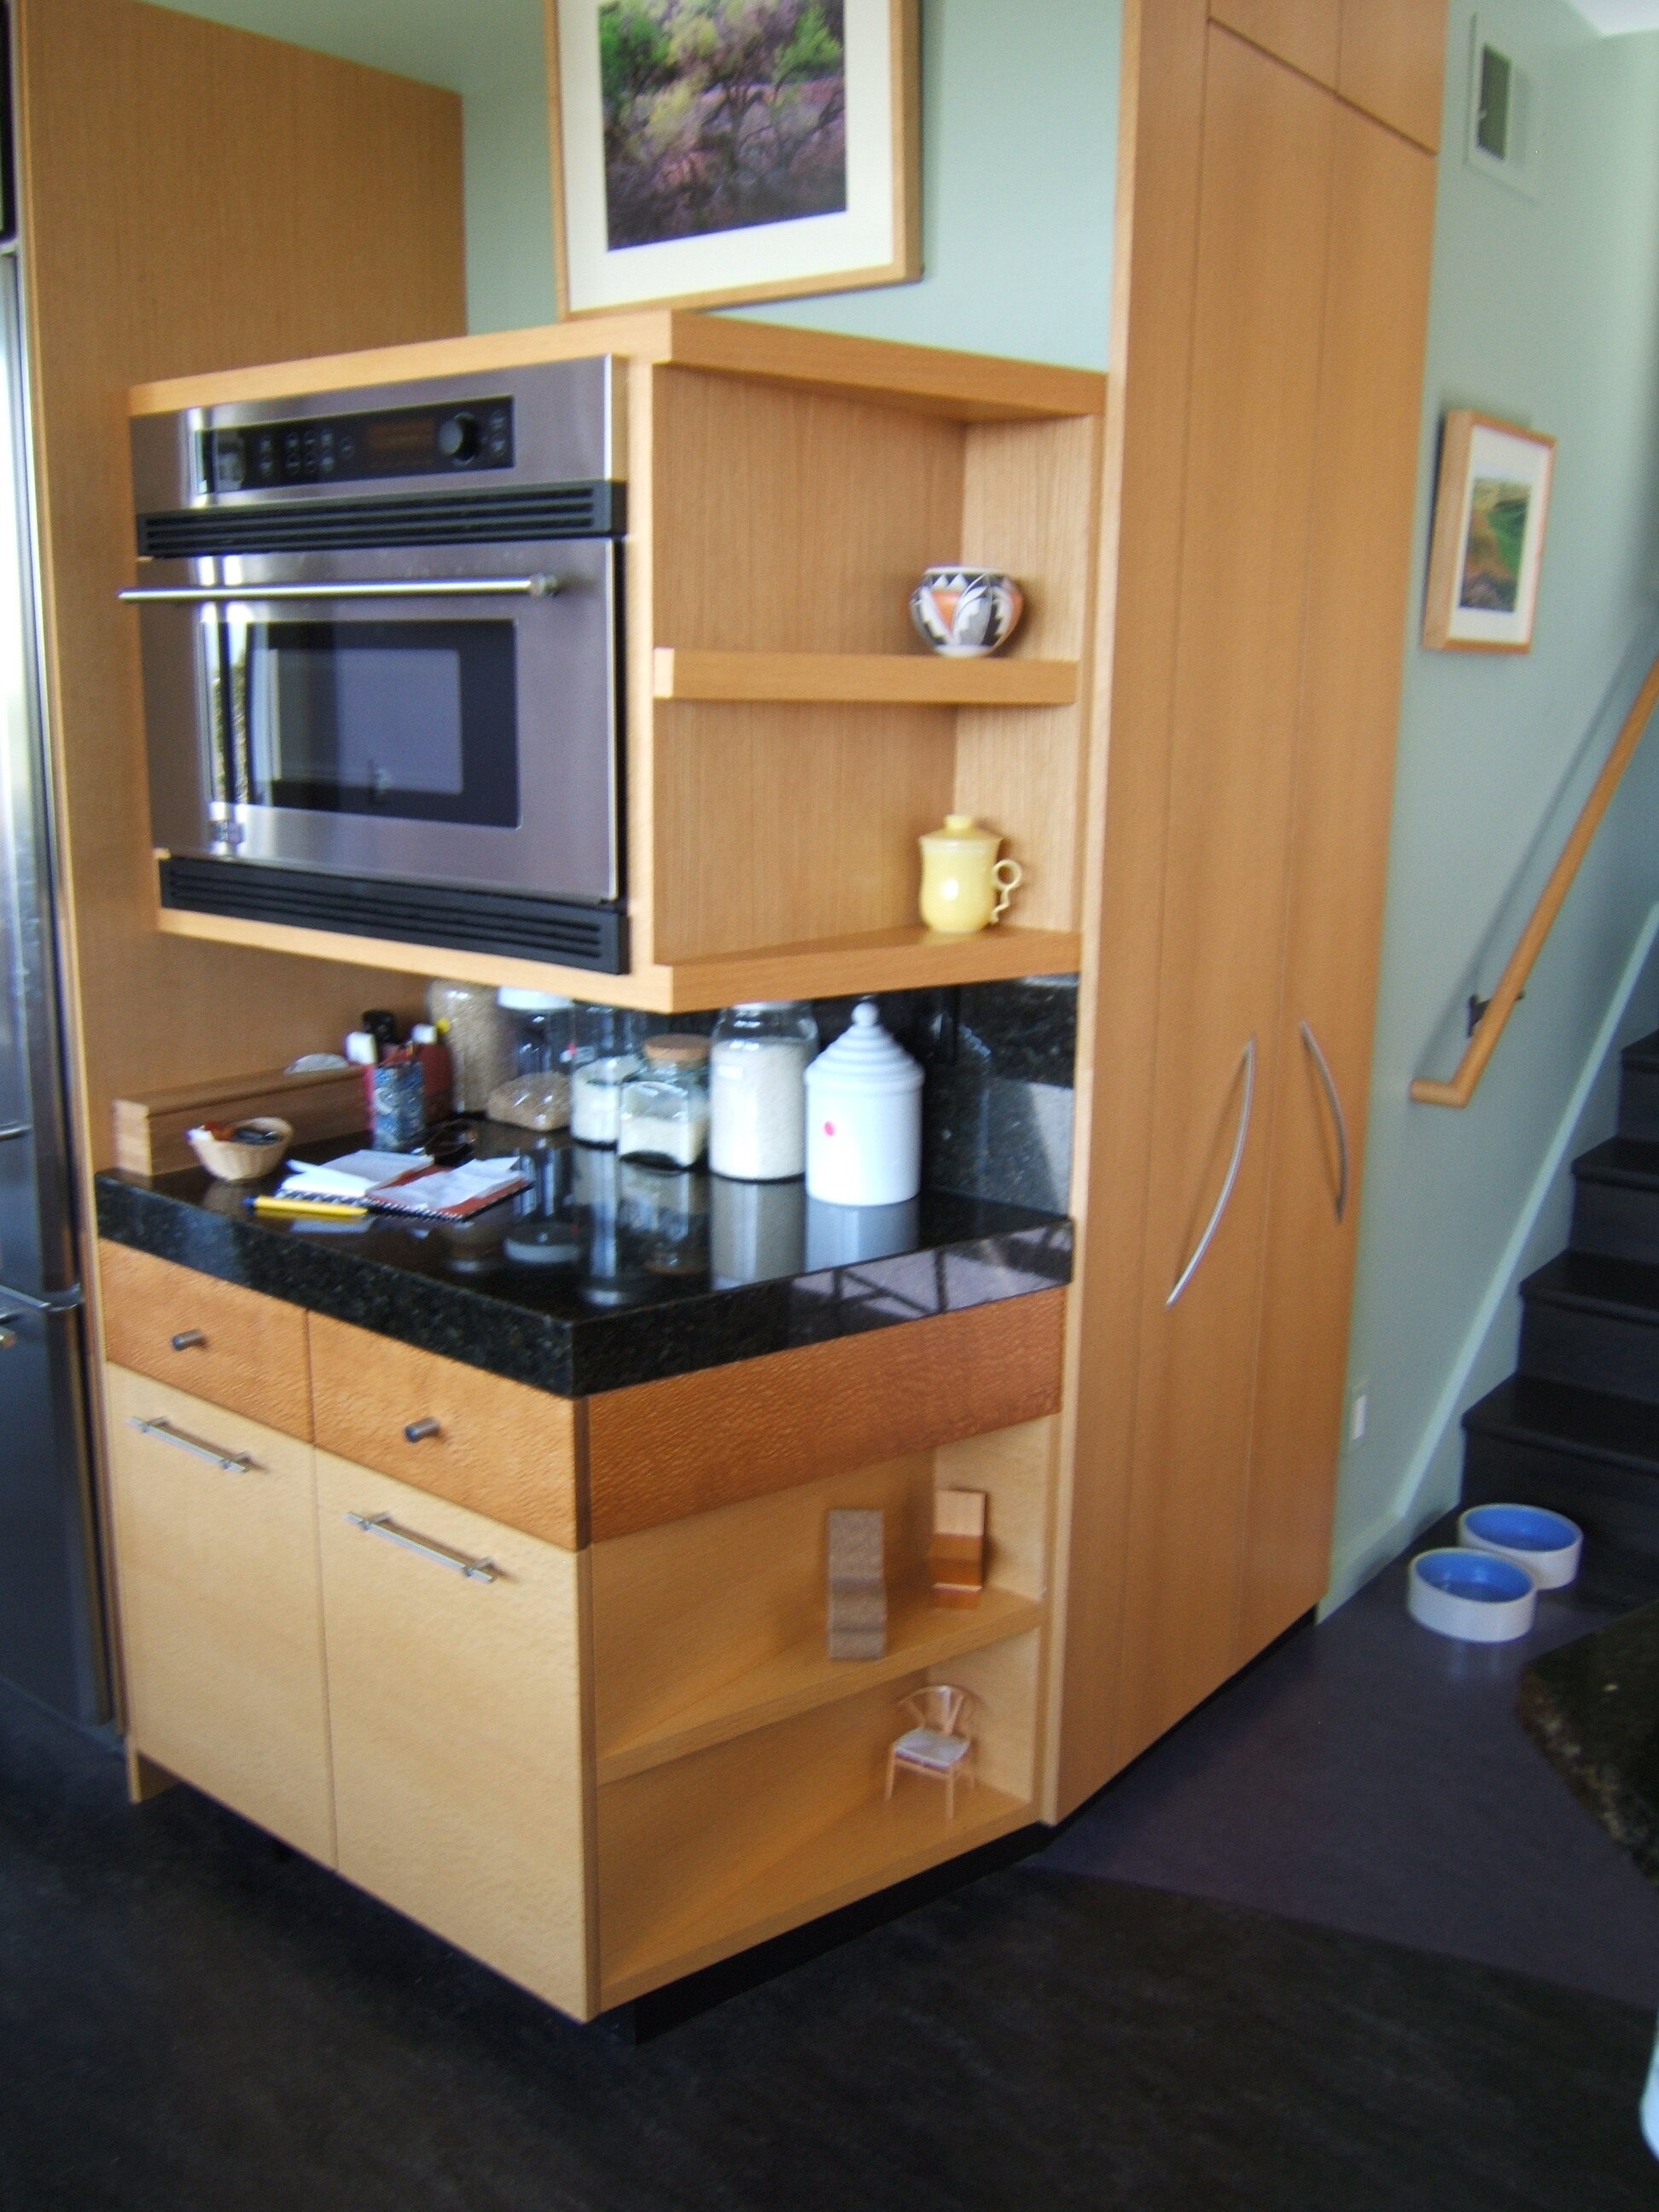 Microwave Corner at the refrigerator with Pantry behind